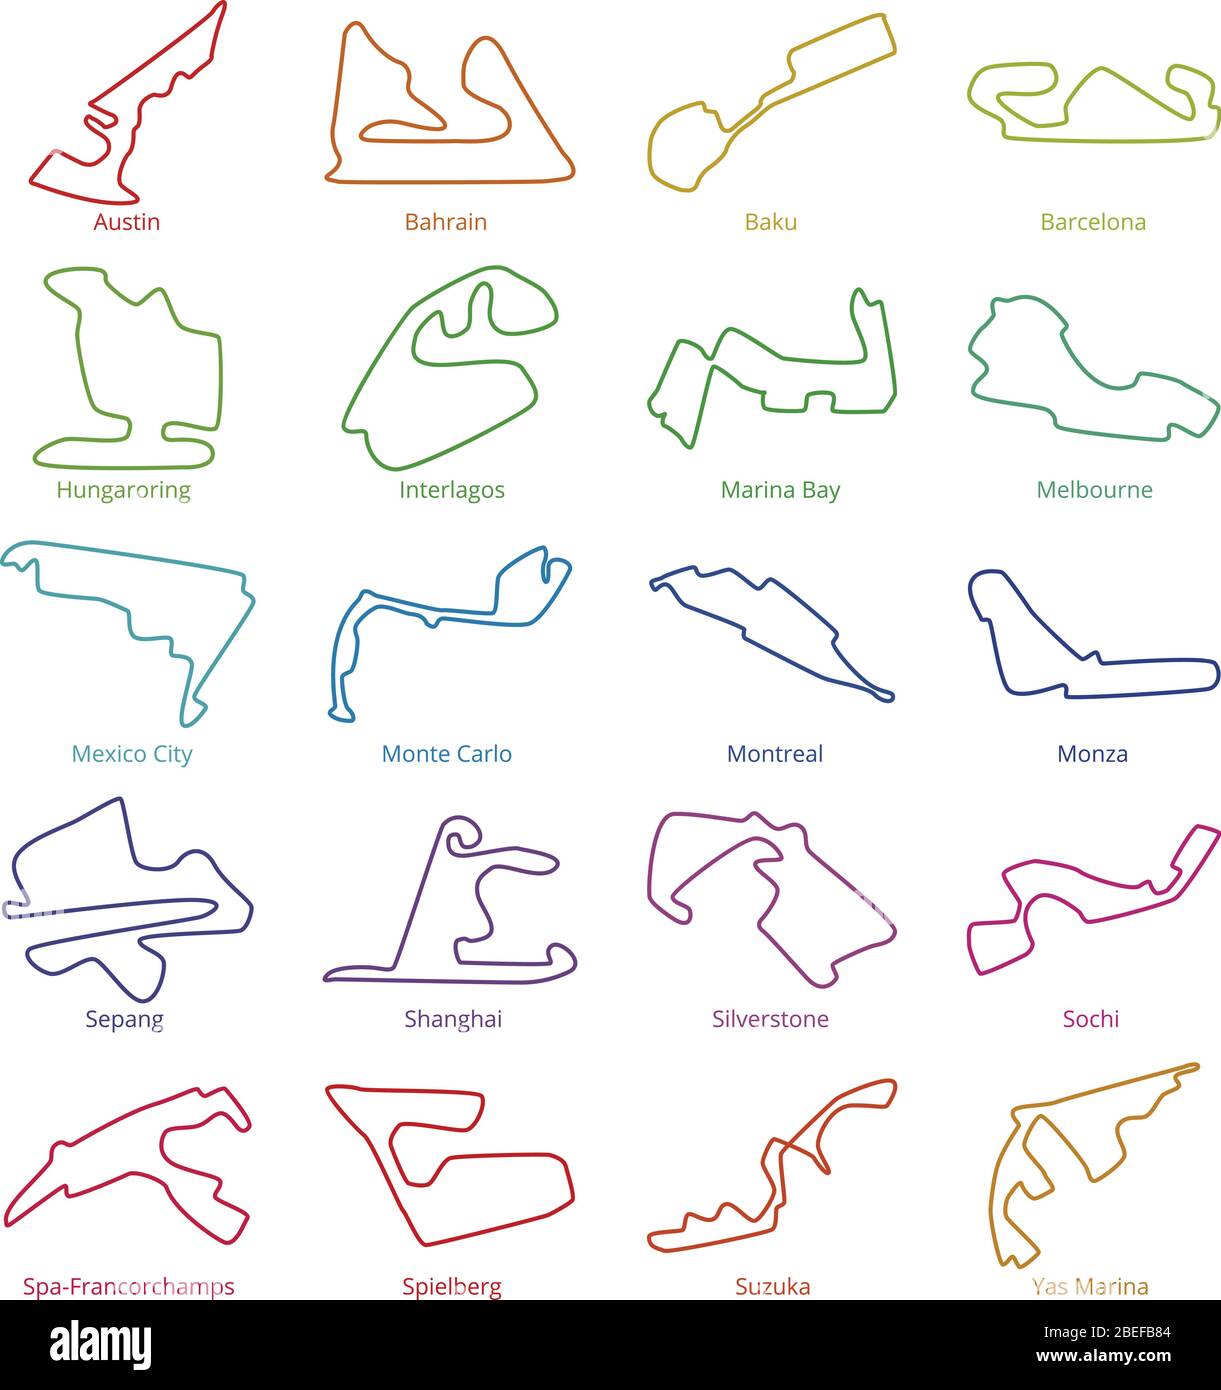 Motorsport race tracks vector circuits. Illustration of circuit racetrack collection Stock Vector